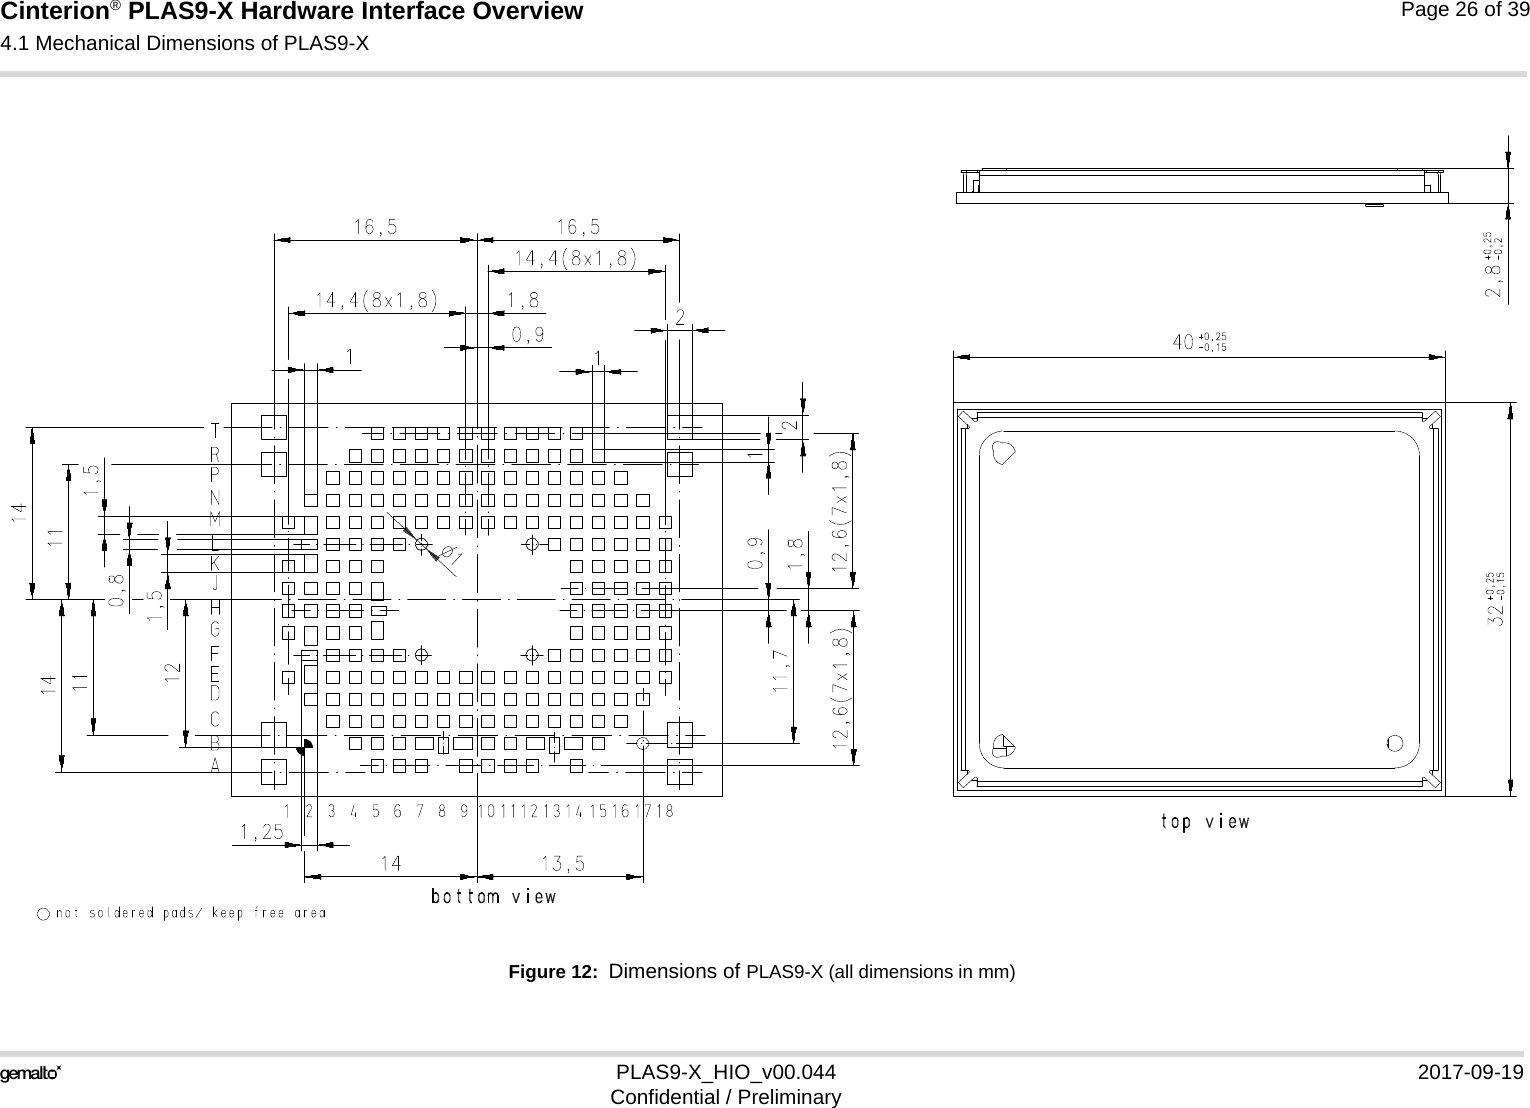 Cinterion® PLAS9-X Hardware Interface Overview4.1 Mechanical Dimensions of PLAS9-X26PLAS9-X_HIO_v00.044 2017-09-19Confidential / PreliminaryPage 26 of 39Figure 12:  Dimensions of PLAS9-X (all dimensions in mm)